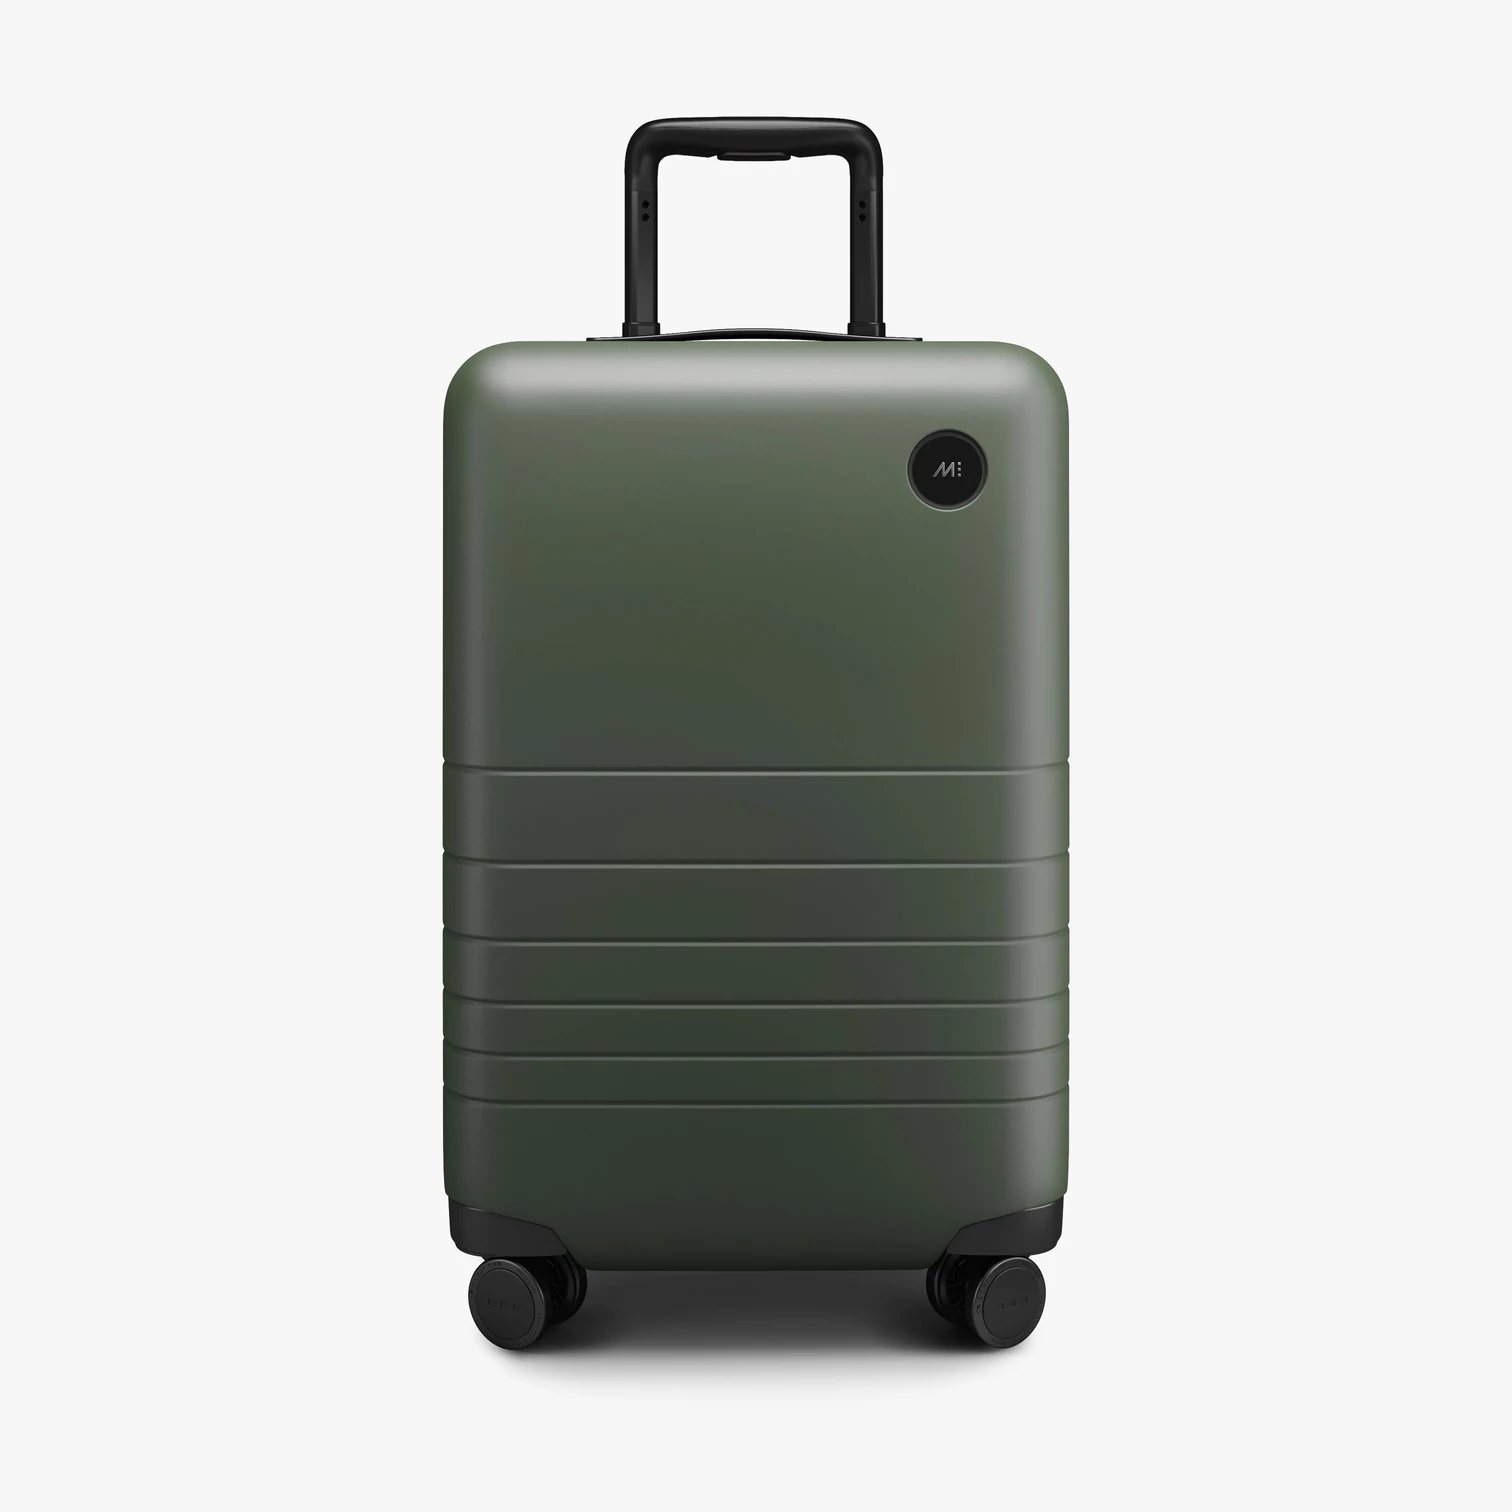 Olive Green hard case carry on luggage. Click this image to be taken to the Monos website to buy your luggage.